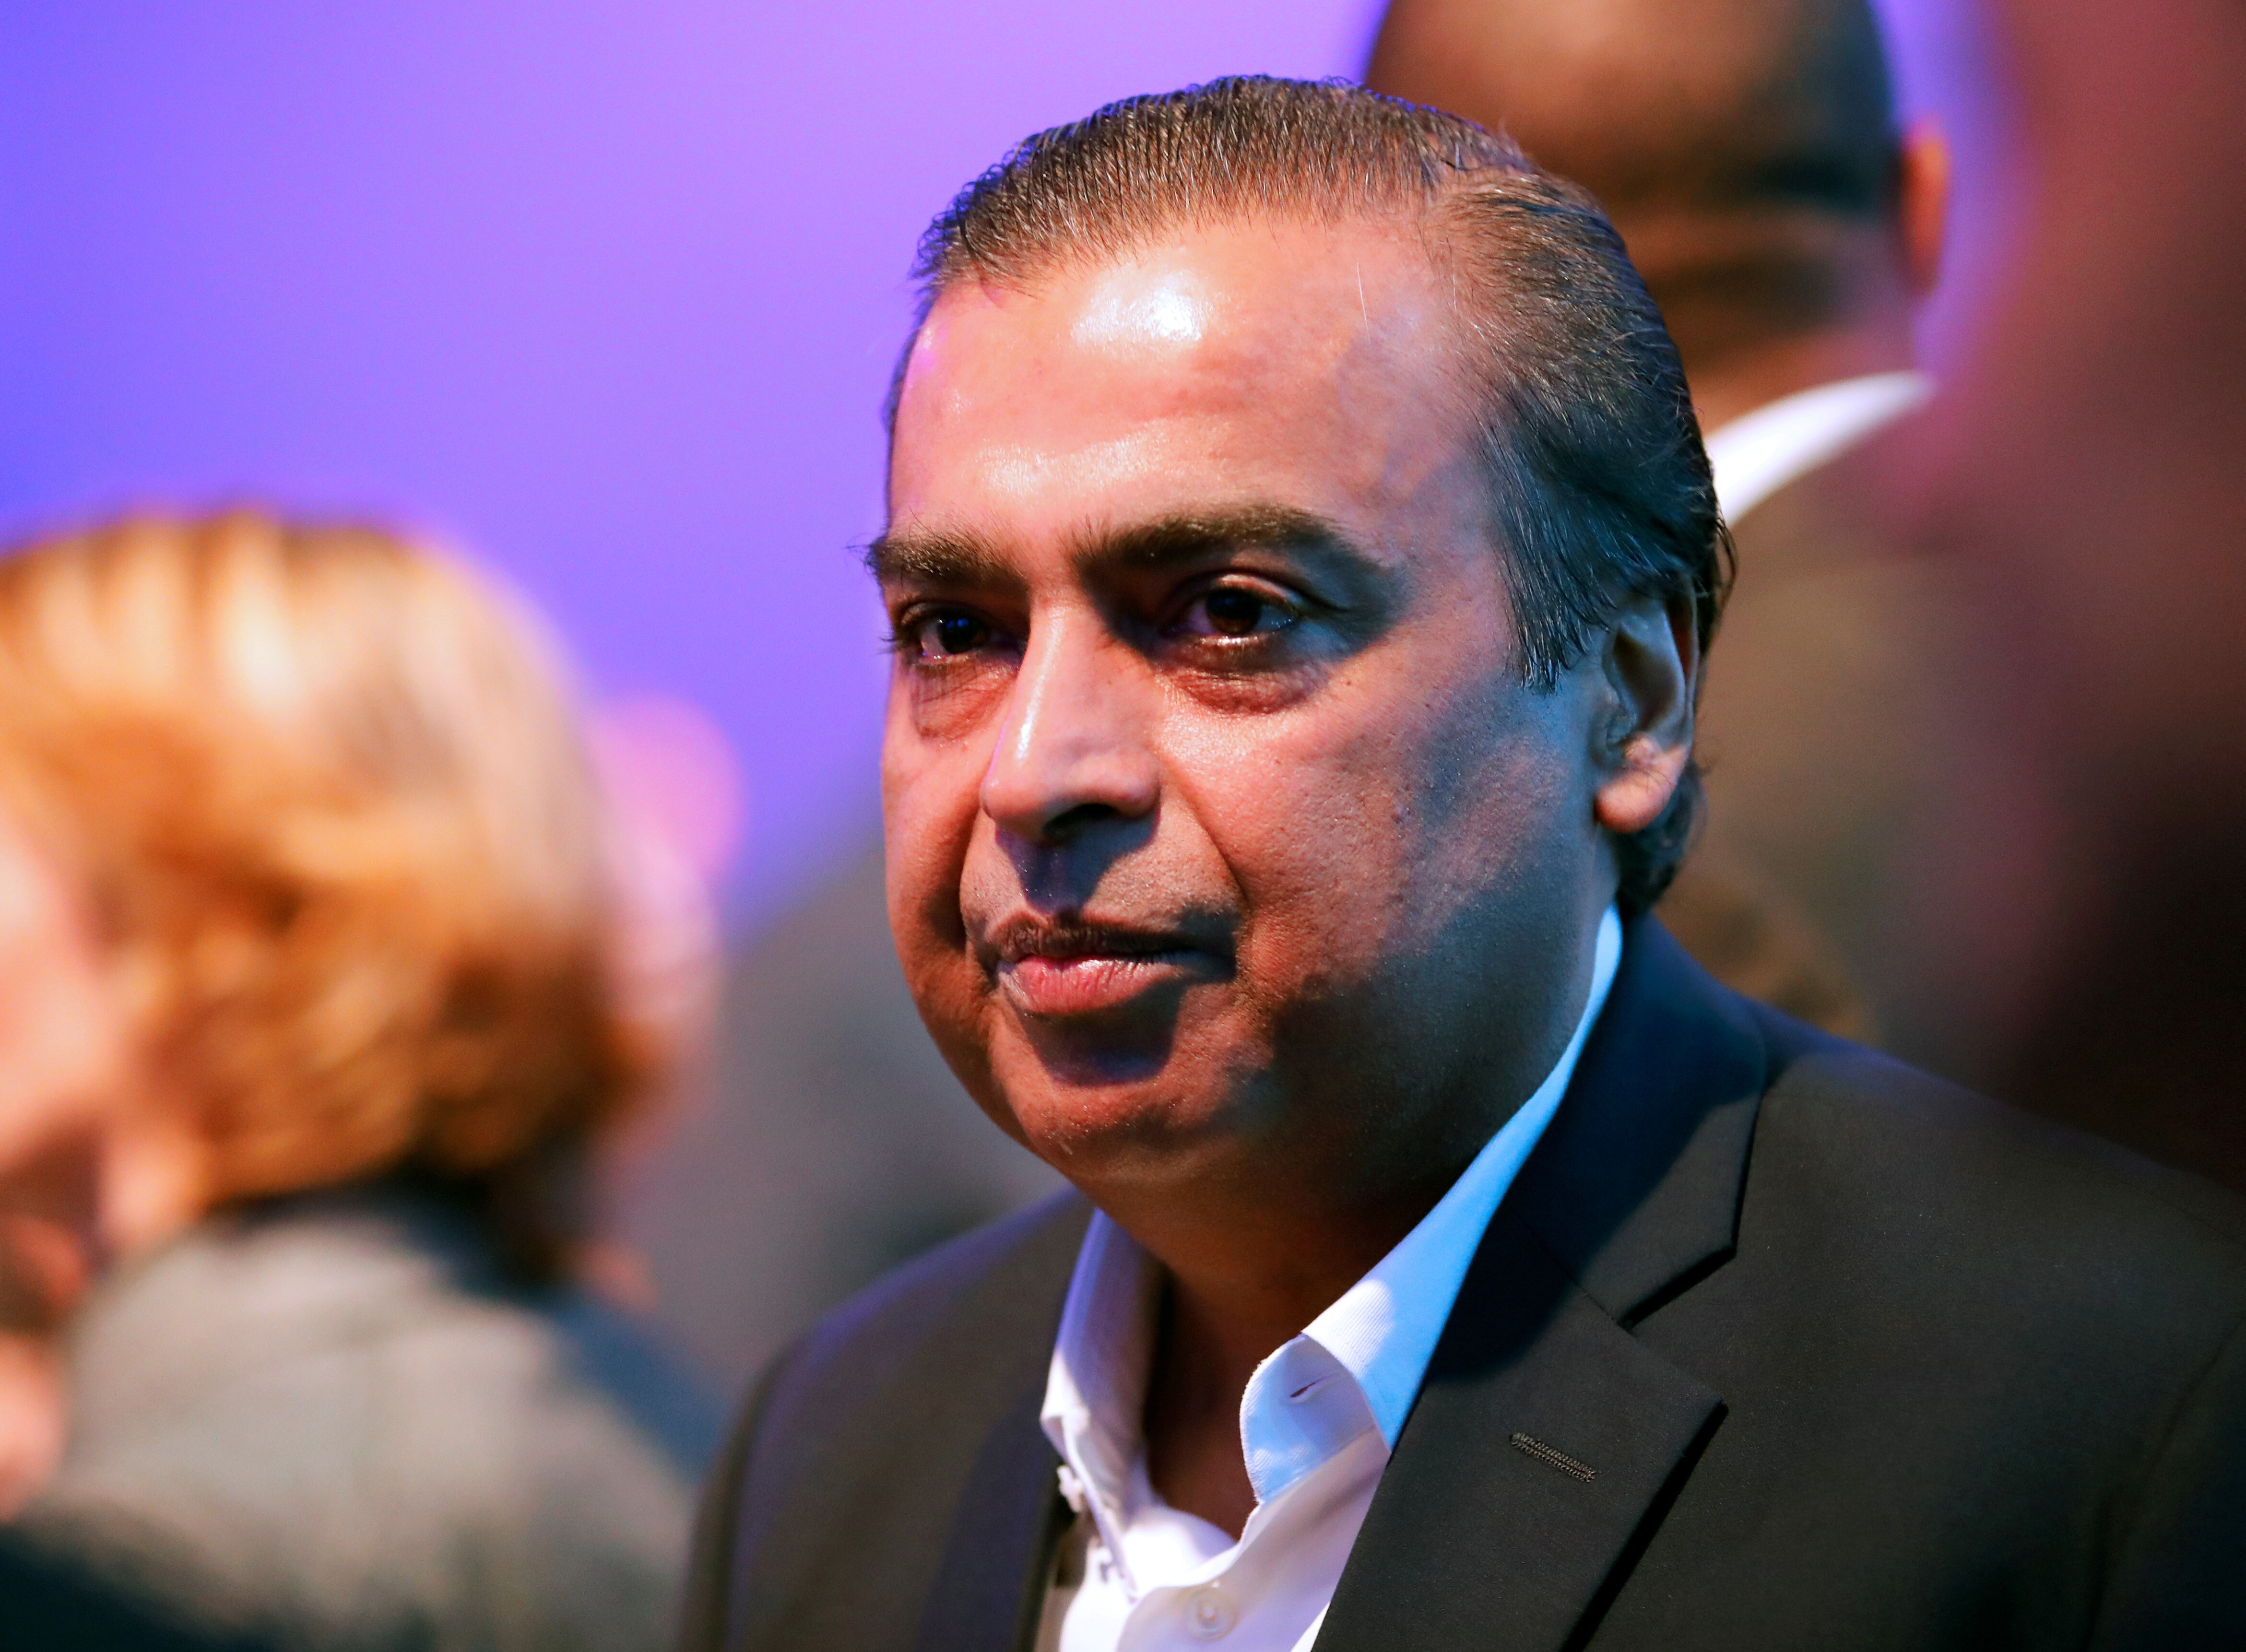 Mukesh Ambani, chairman and managing director of Reliance Industries, attends the World Economic Forum meeting in Davos, Switzerland, in 2018. Photo: Reuters